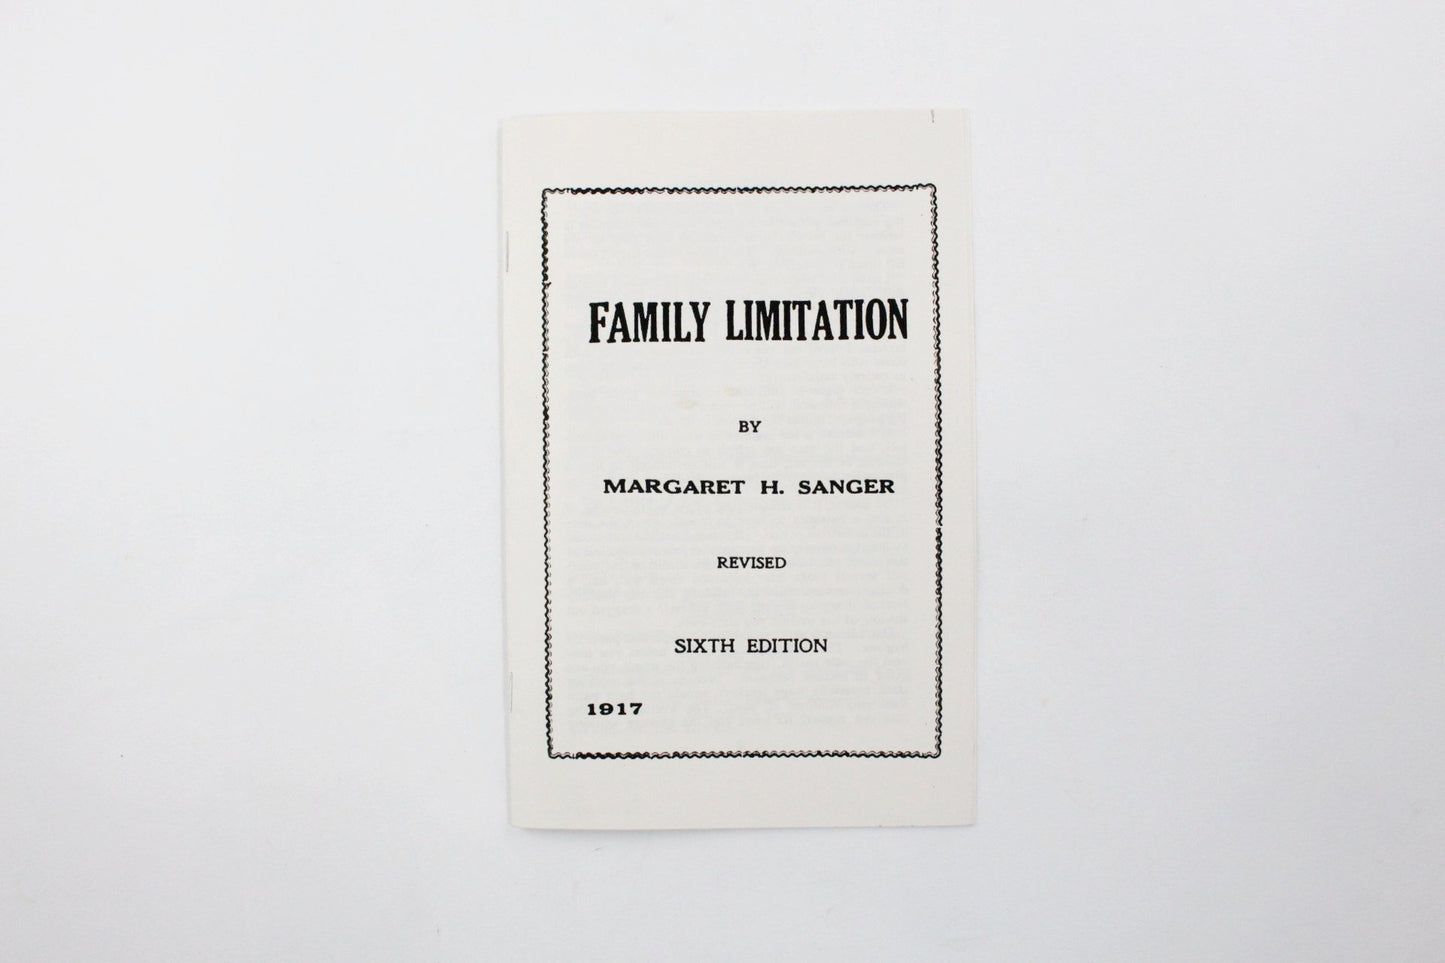 Boardwalk Empire's Family Limitation Pamphlet Given To Margaret By Mrs. McGarry (3)